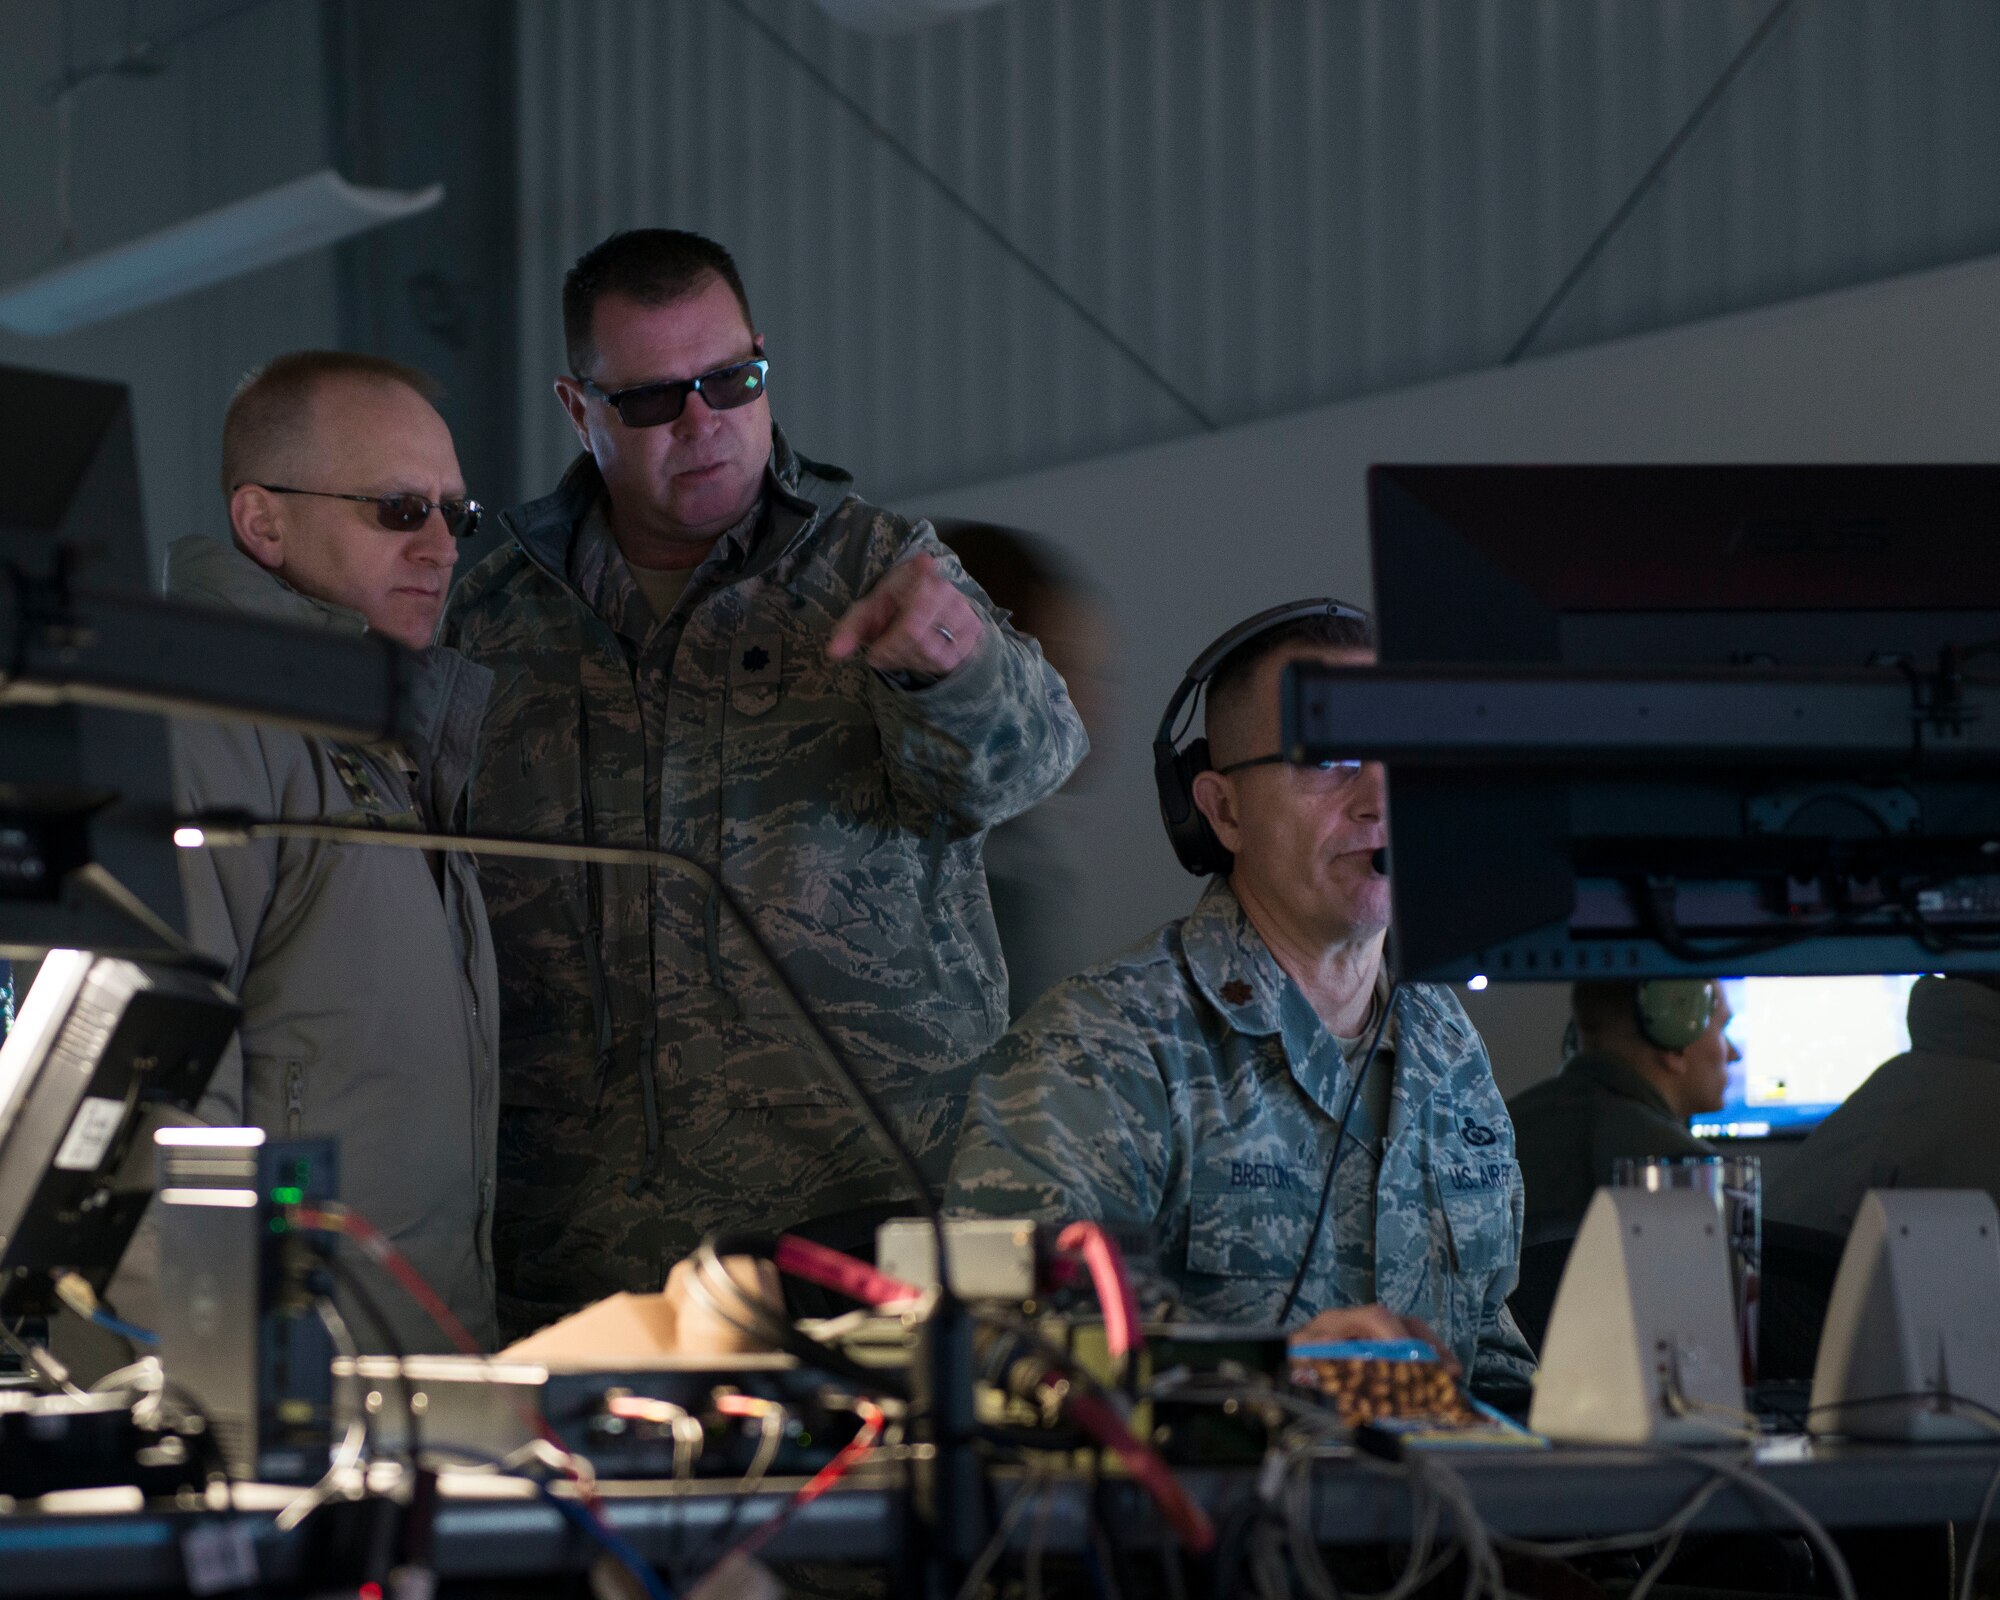 The 103rd Air Control Squadron participates in Sentry Savannah 19-1 Large Force Exercise in Orange, Conn., February 1, 2019. For the first time, 103rd ACS controlled aircraft operating in Savannah, Ga. from home station. (Air Force photo by Staff Sgt. Chad Warren)